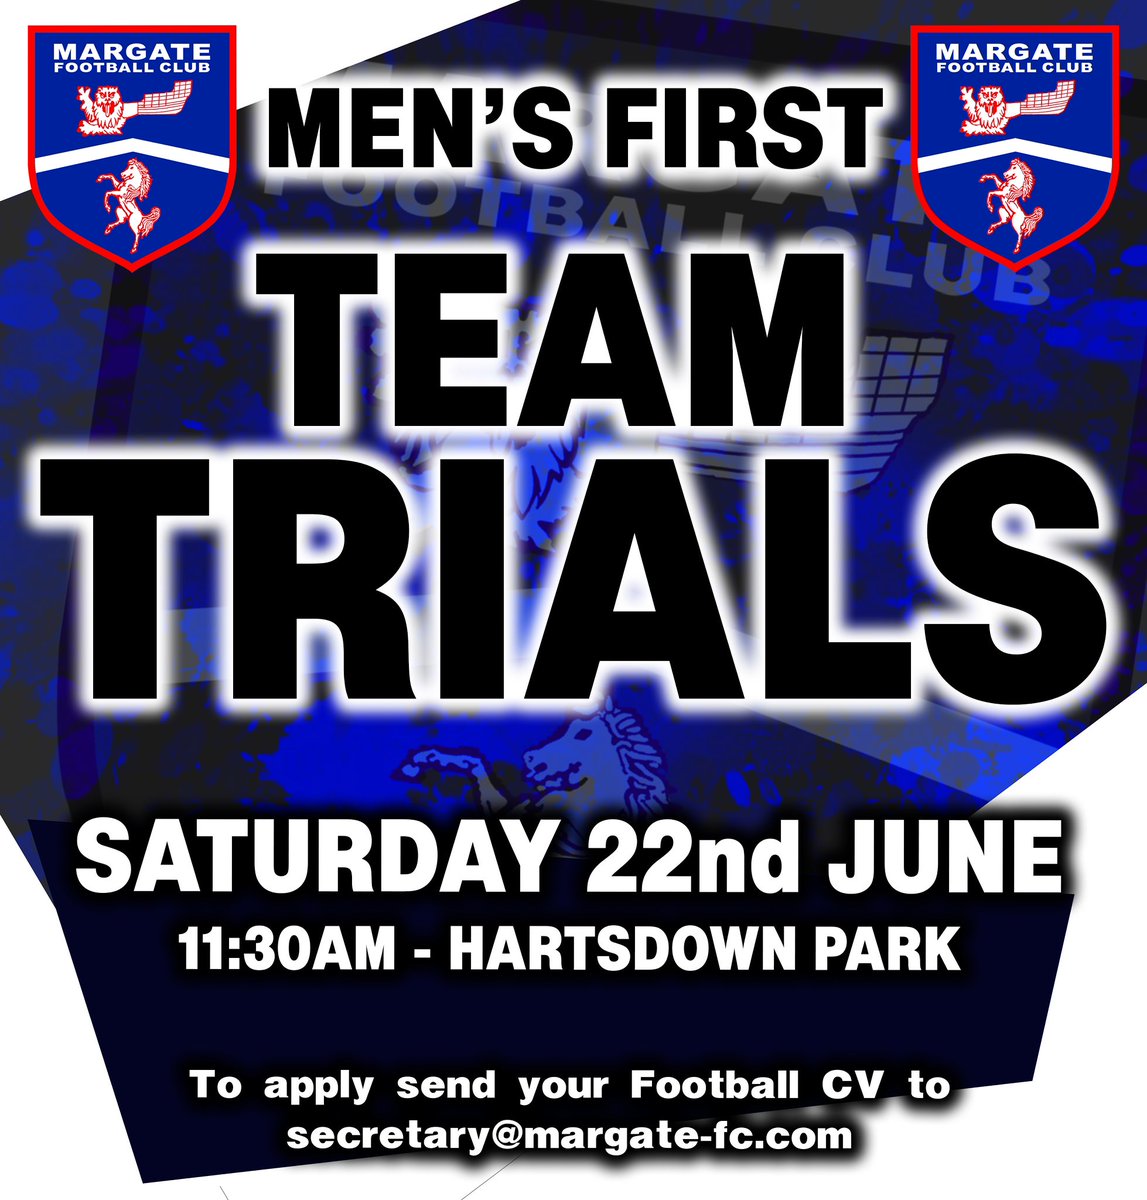 OPEN TRIAL ⚽️ We are delighted to confirm the date for our first team open trial on Saturday the 22nd of June, starting 11:30am at Hartsdown Park! 🗓️🏟️ To be invited to the trial, please email your footballing CV to our club secretary at secretary@margate-fc.com 📧 #UpTheGate